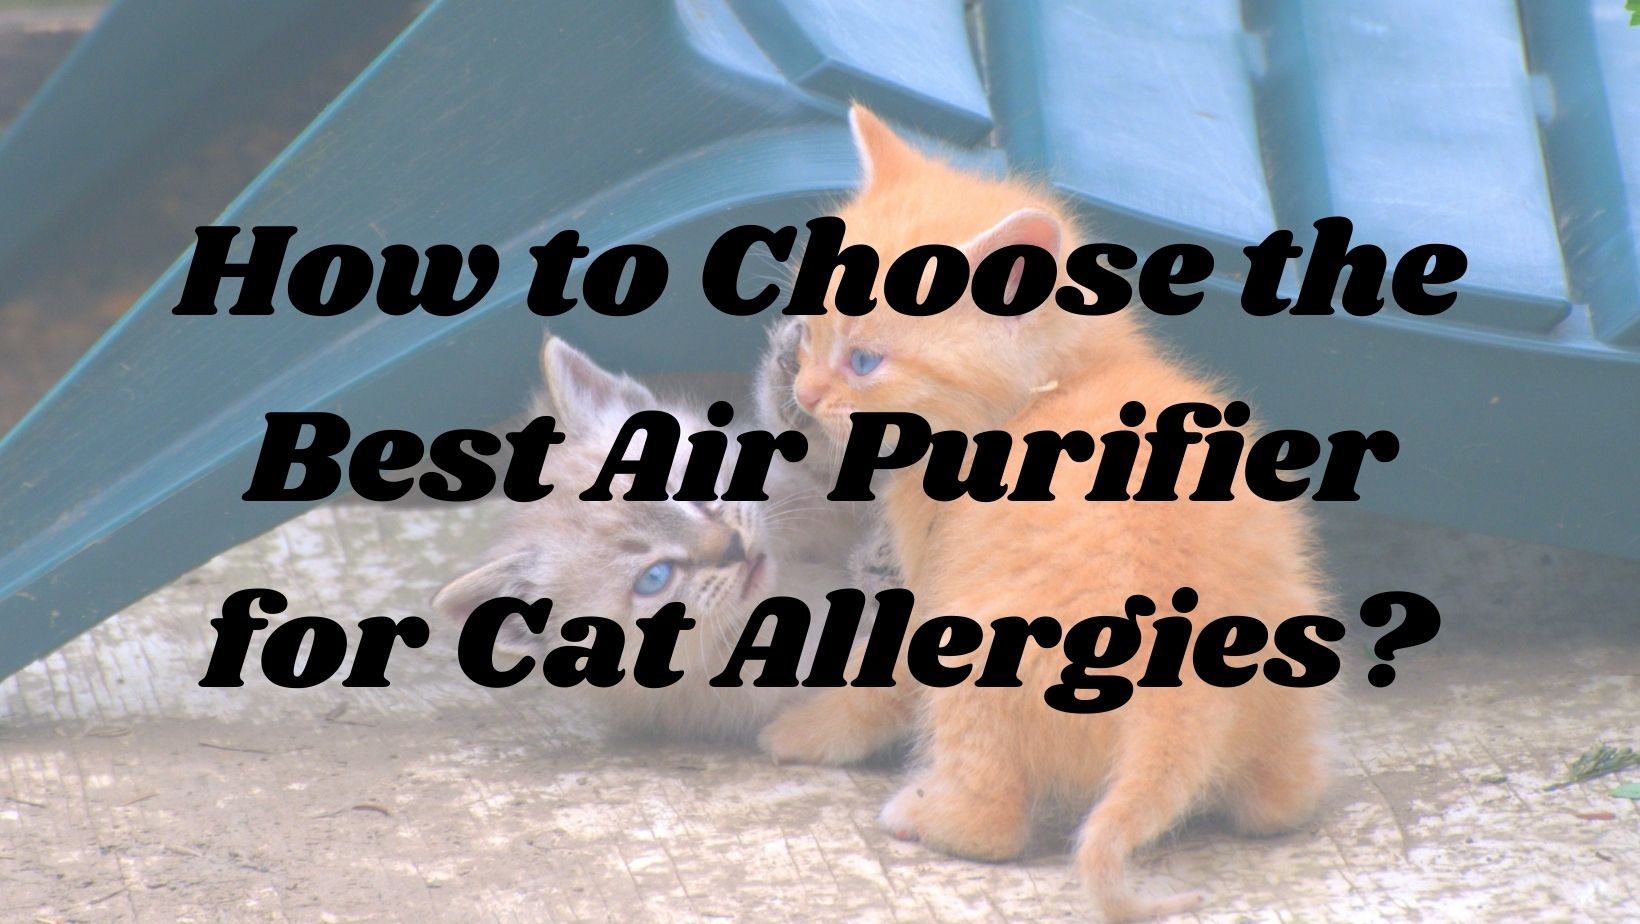 How to Choose the Best Air Purifier for Cat Allergies